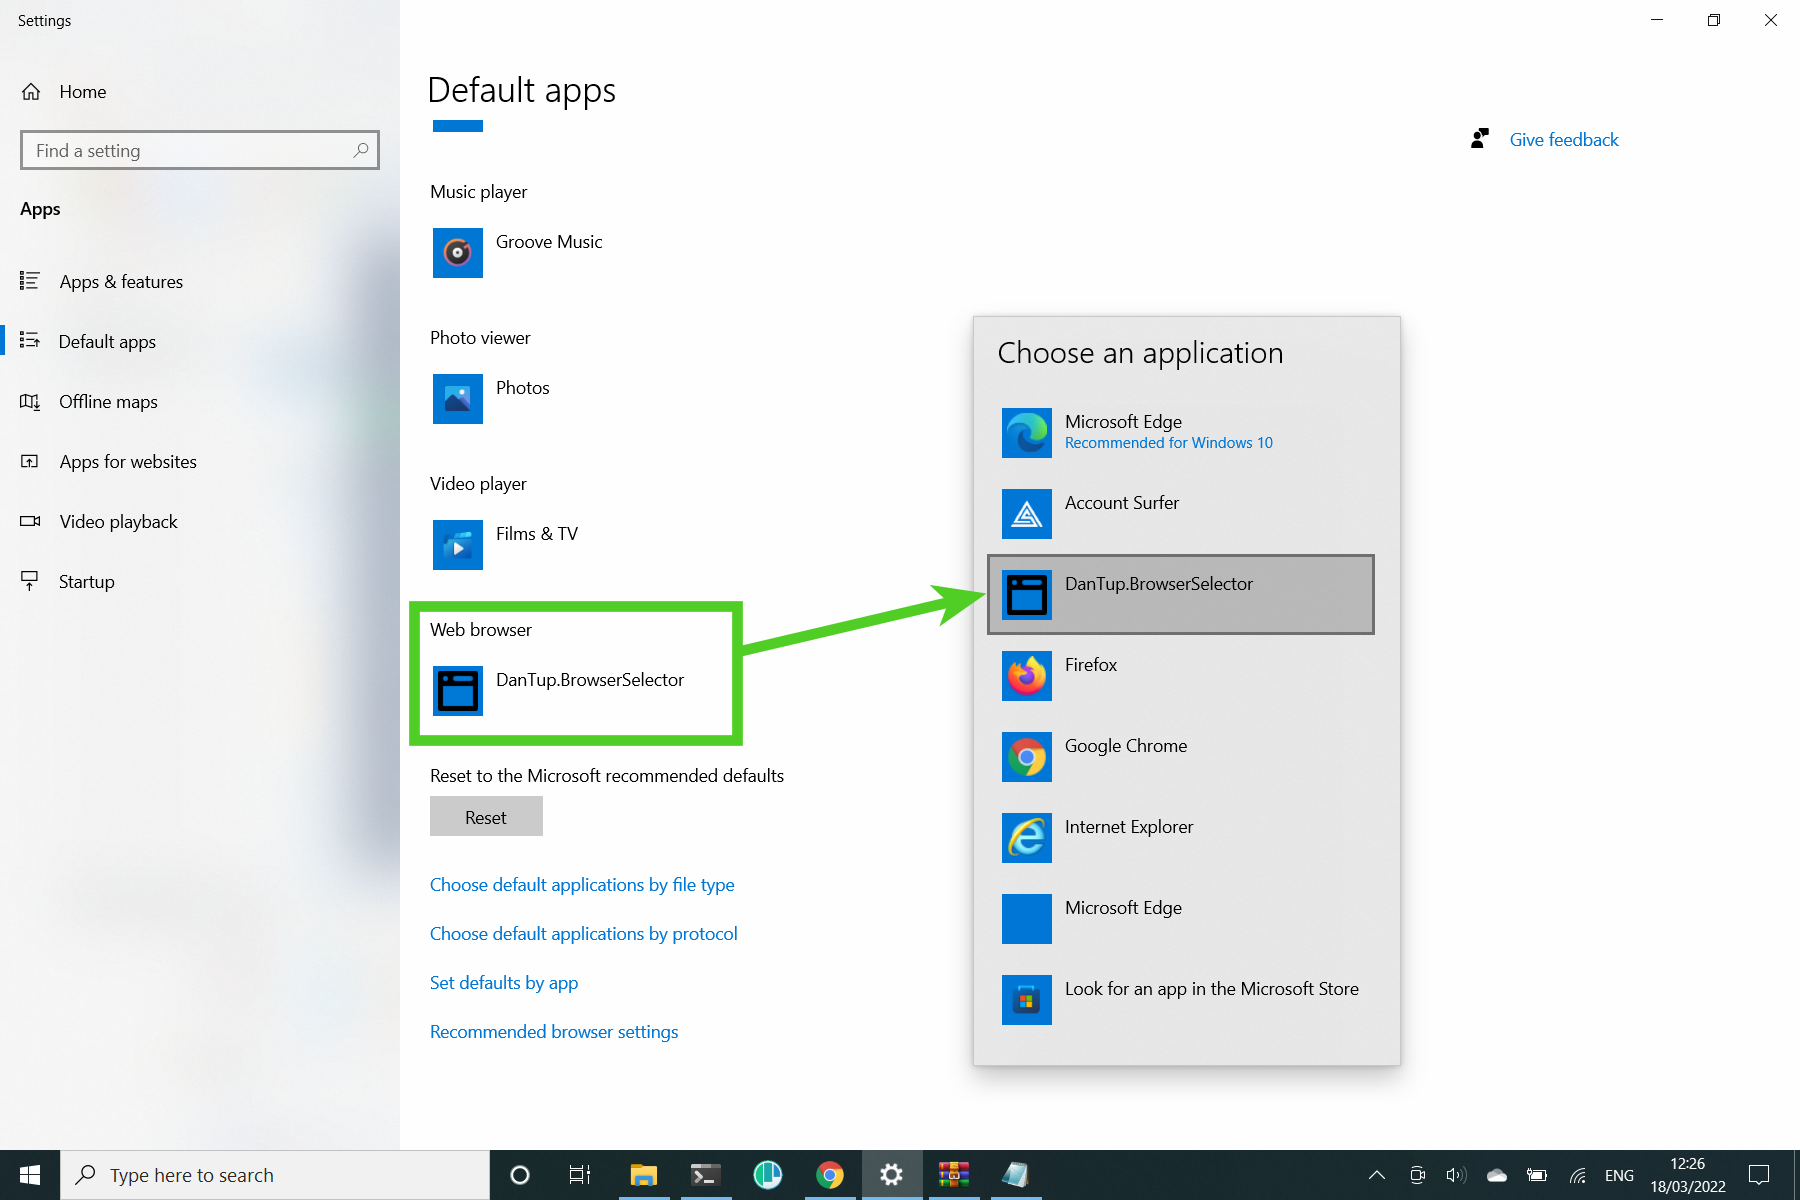 The windows default apps settings showing how to select BrowserSelector